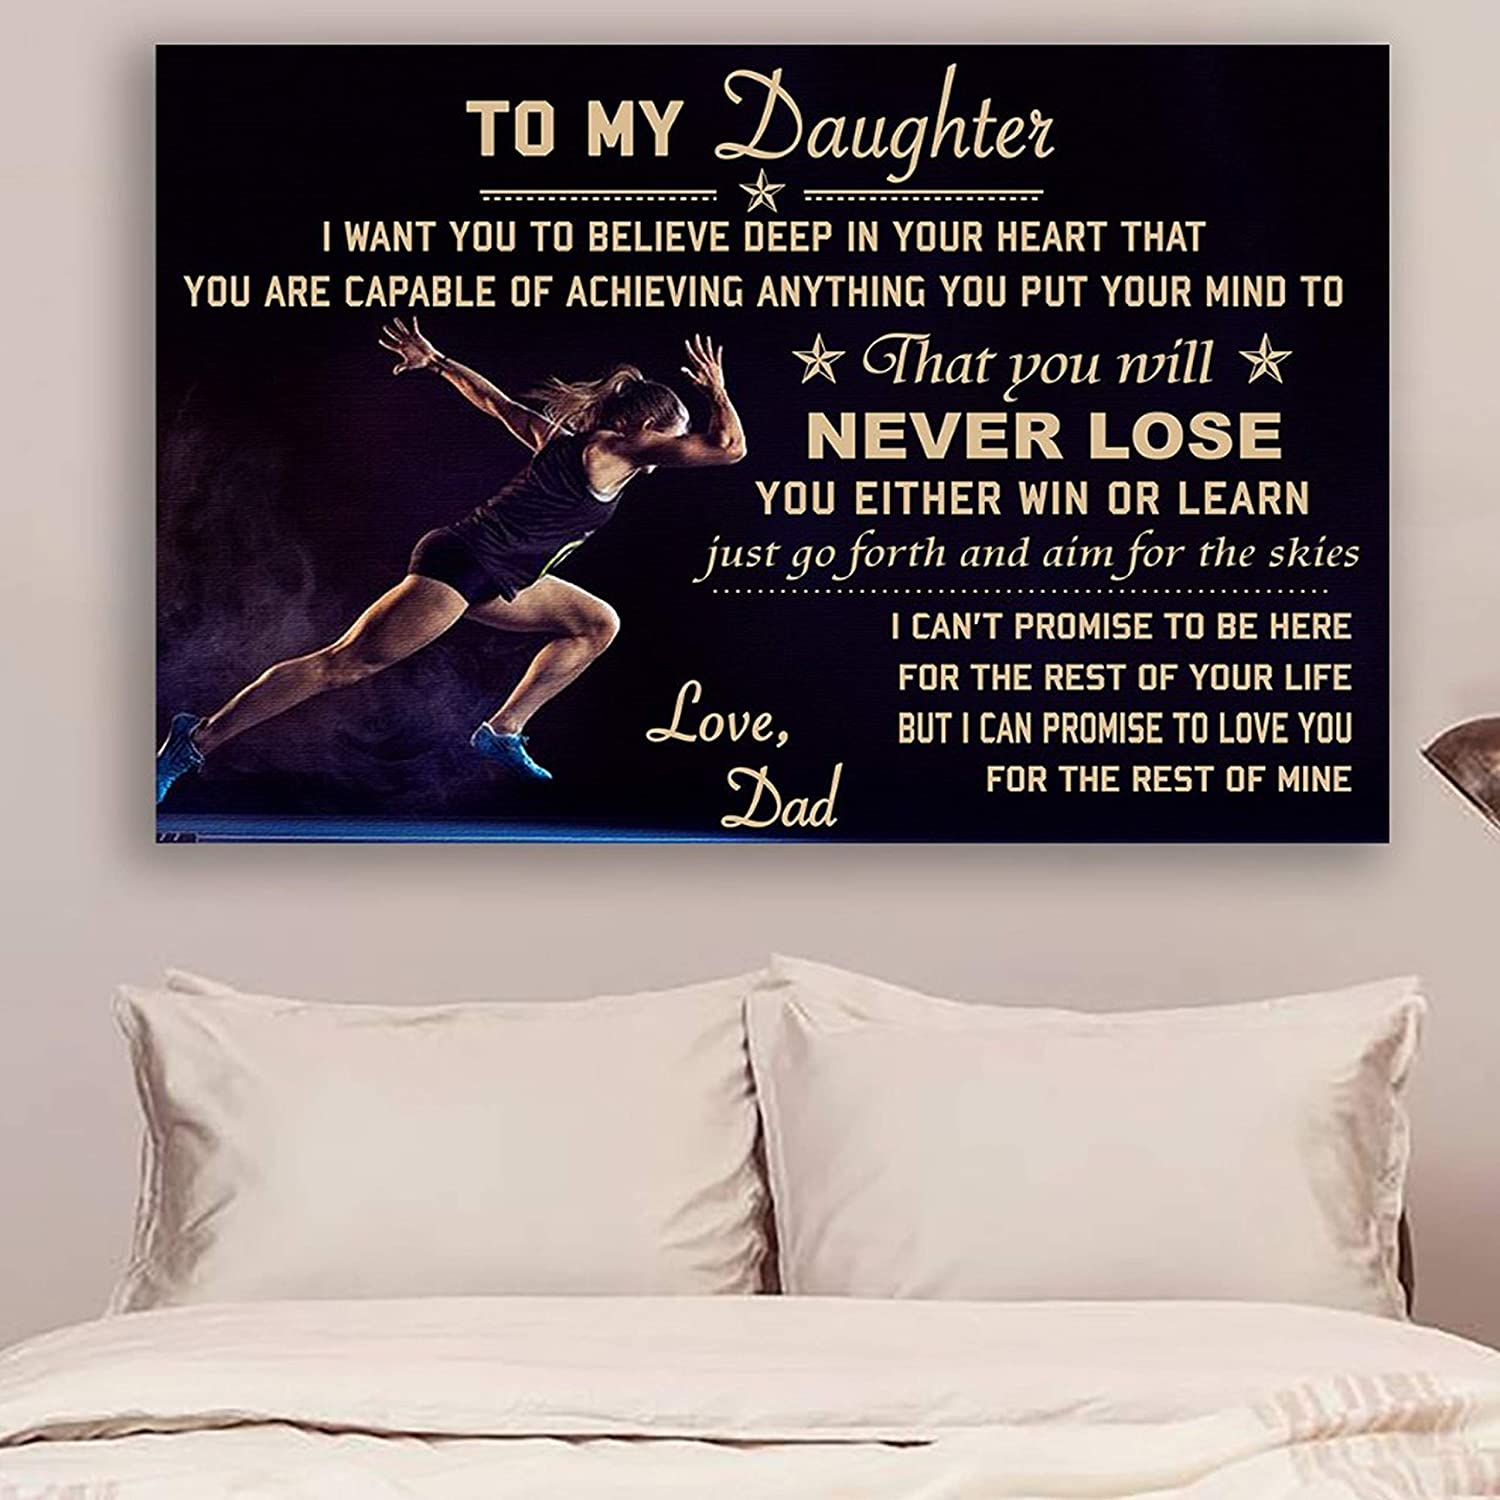 Athletics Poster – DAD to Daughter – Never Lose Beautiful Poster is Best Gift for Daughter from Dad